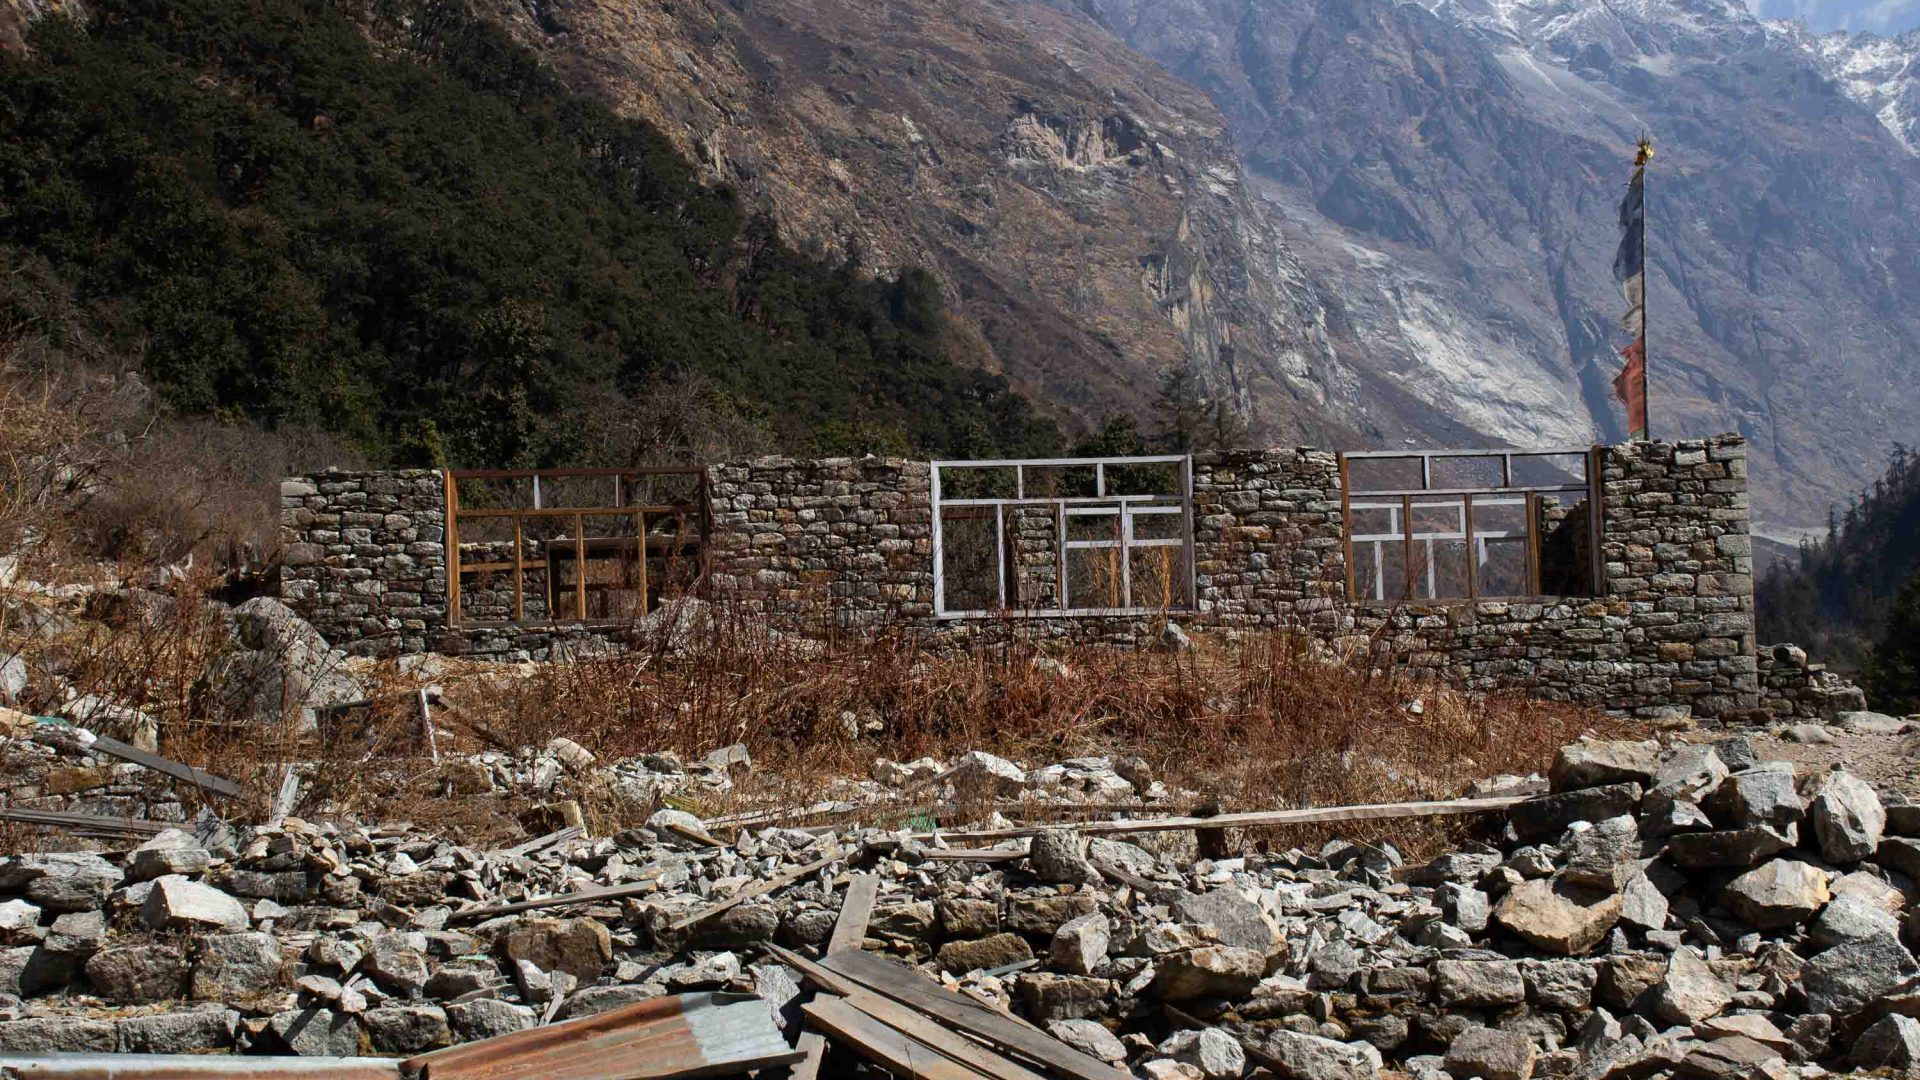 The ruins of a home in the Langtang region.